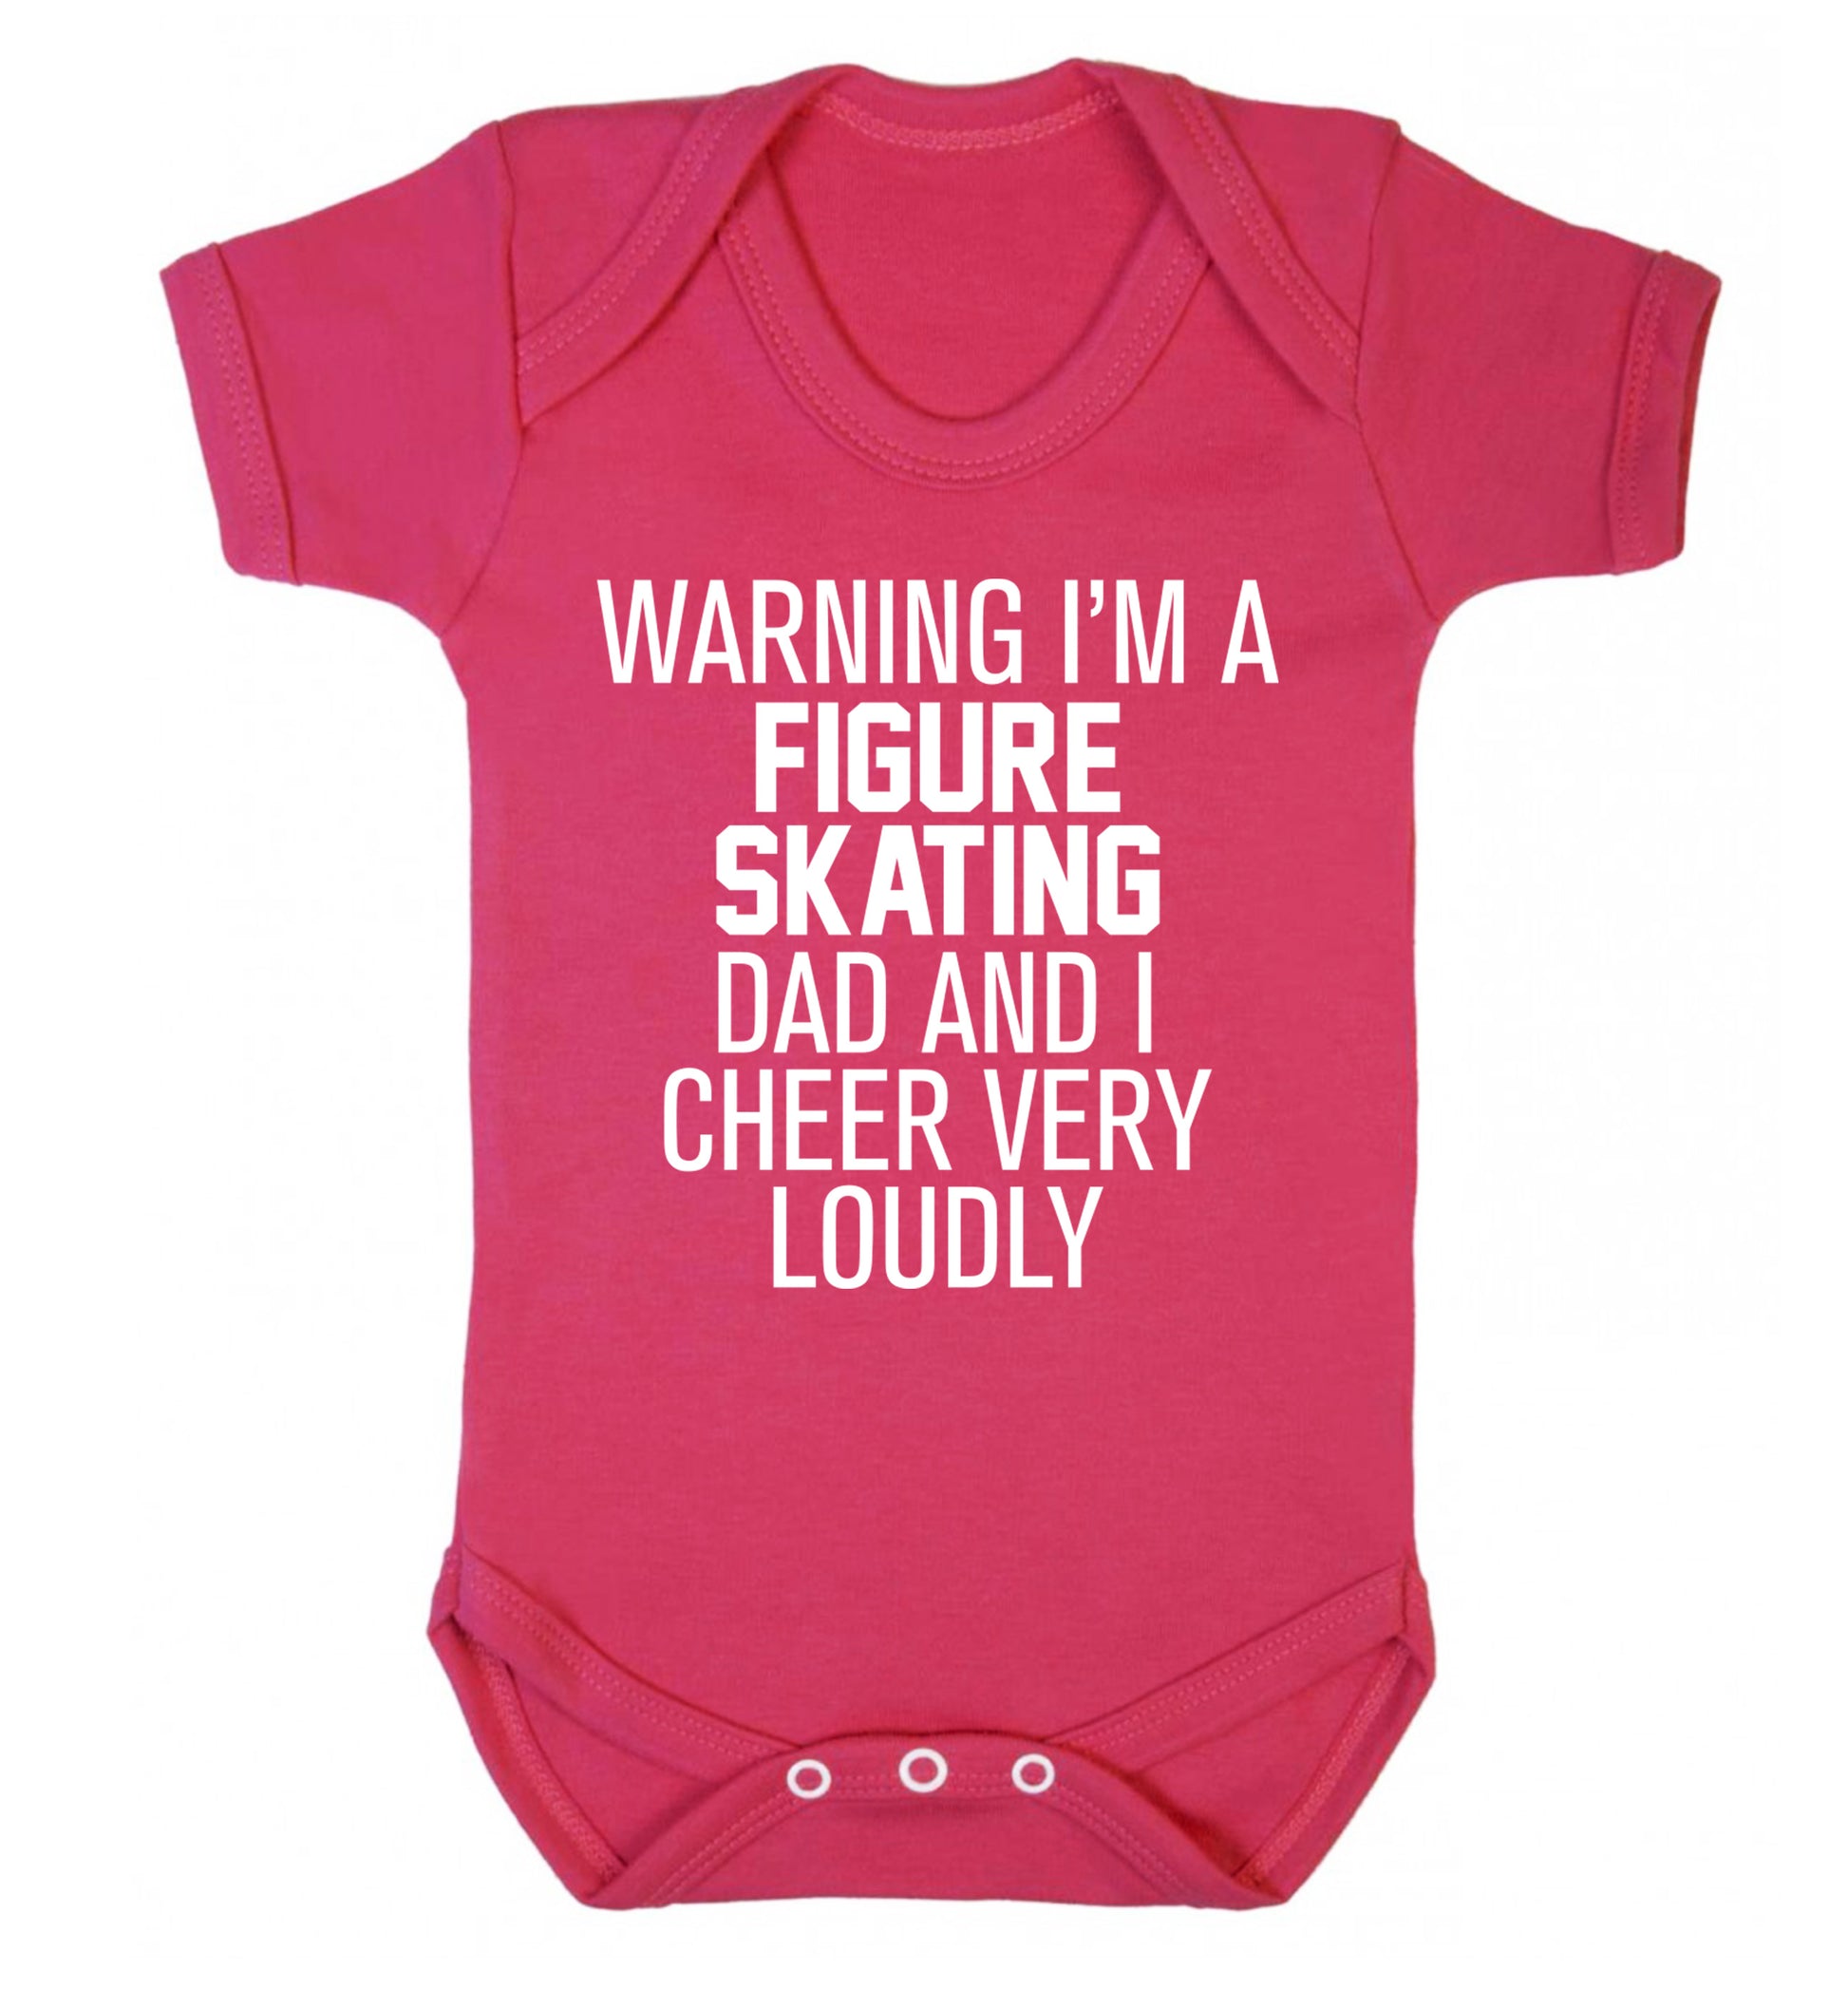 Warning I'm a figure skating dad and I cheer very loudly Baby Vest dark pink 18-24 months